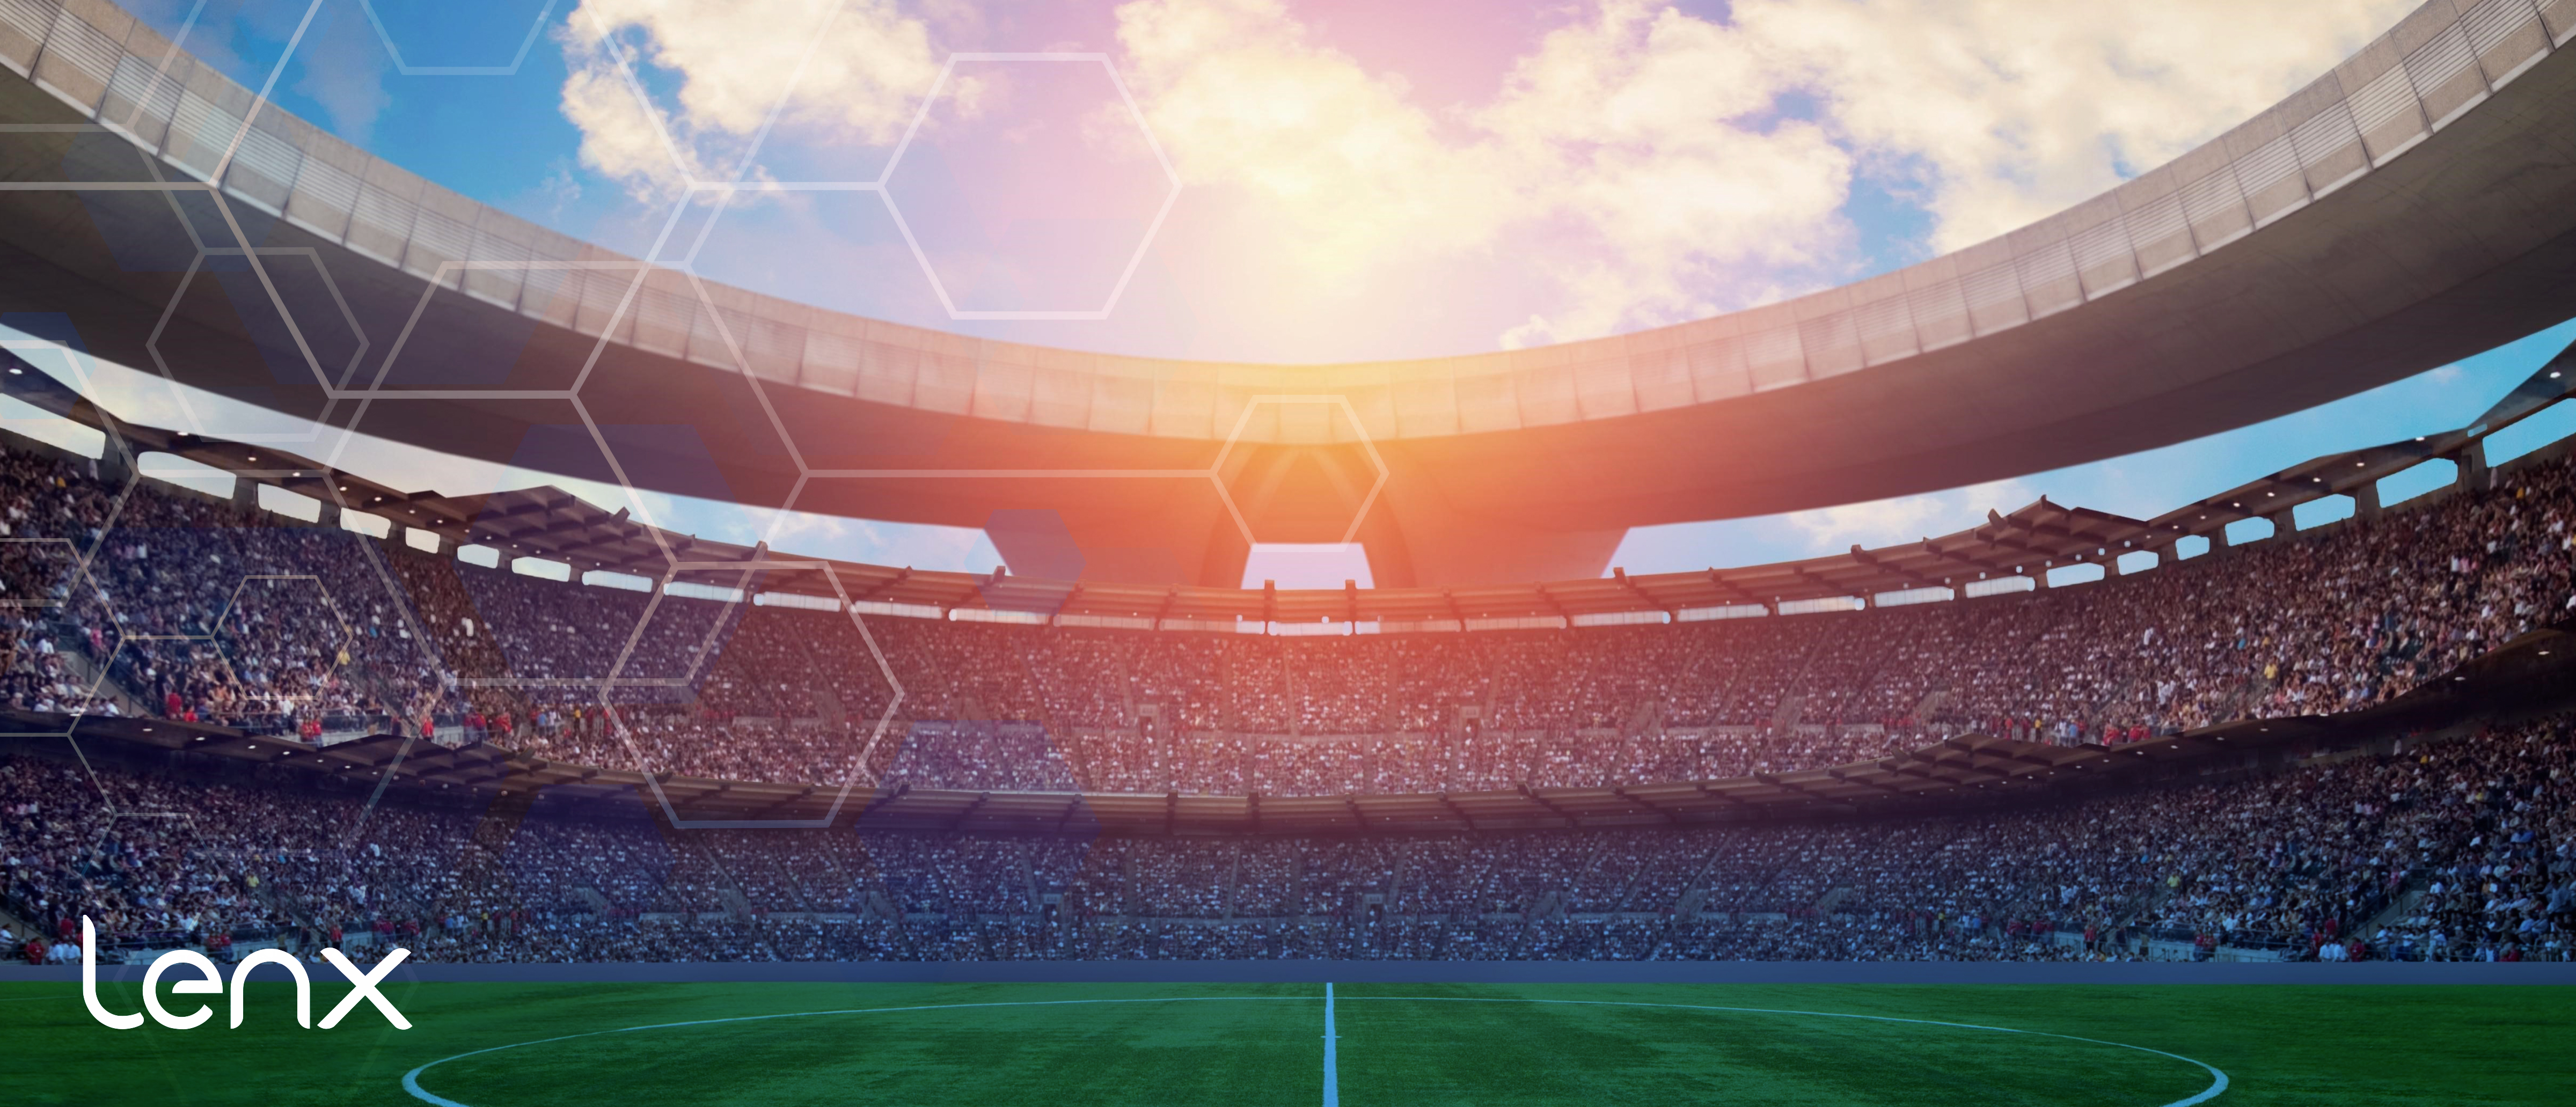 AI Security, Active Shooter Detection Use In Stadiums And Arenas